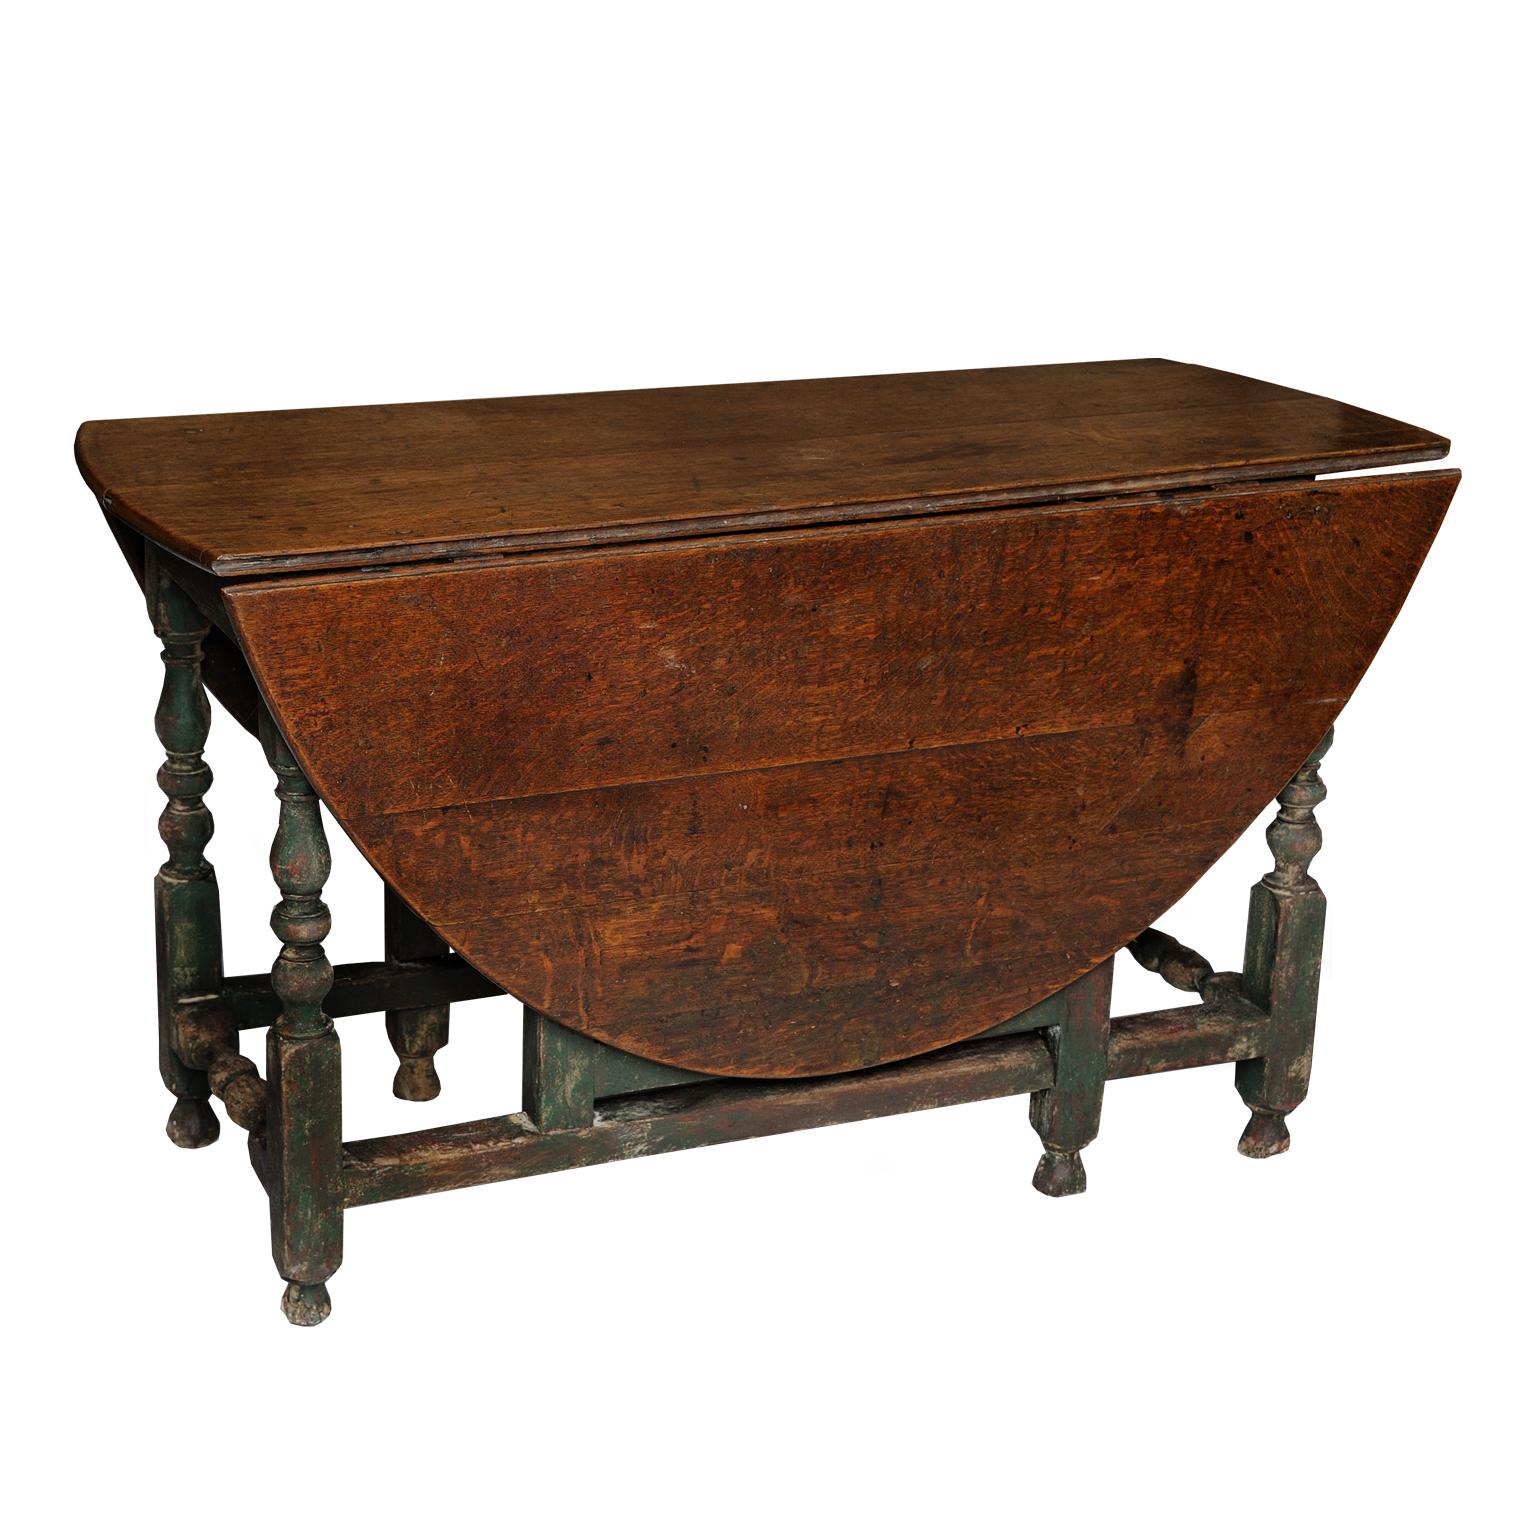 An English George I period oval oak gate leg drop-leaf table with single drawer and dark green painted under-carriage, circa 1720. 
(paintwork refreshed)

Measures: Height 73cm (28.5